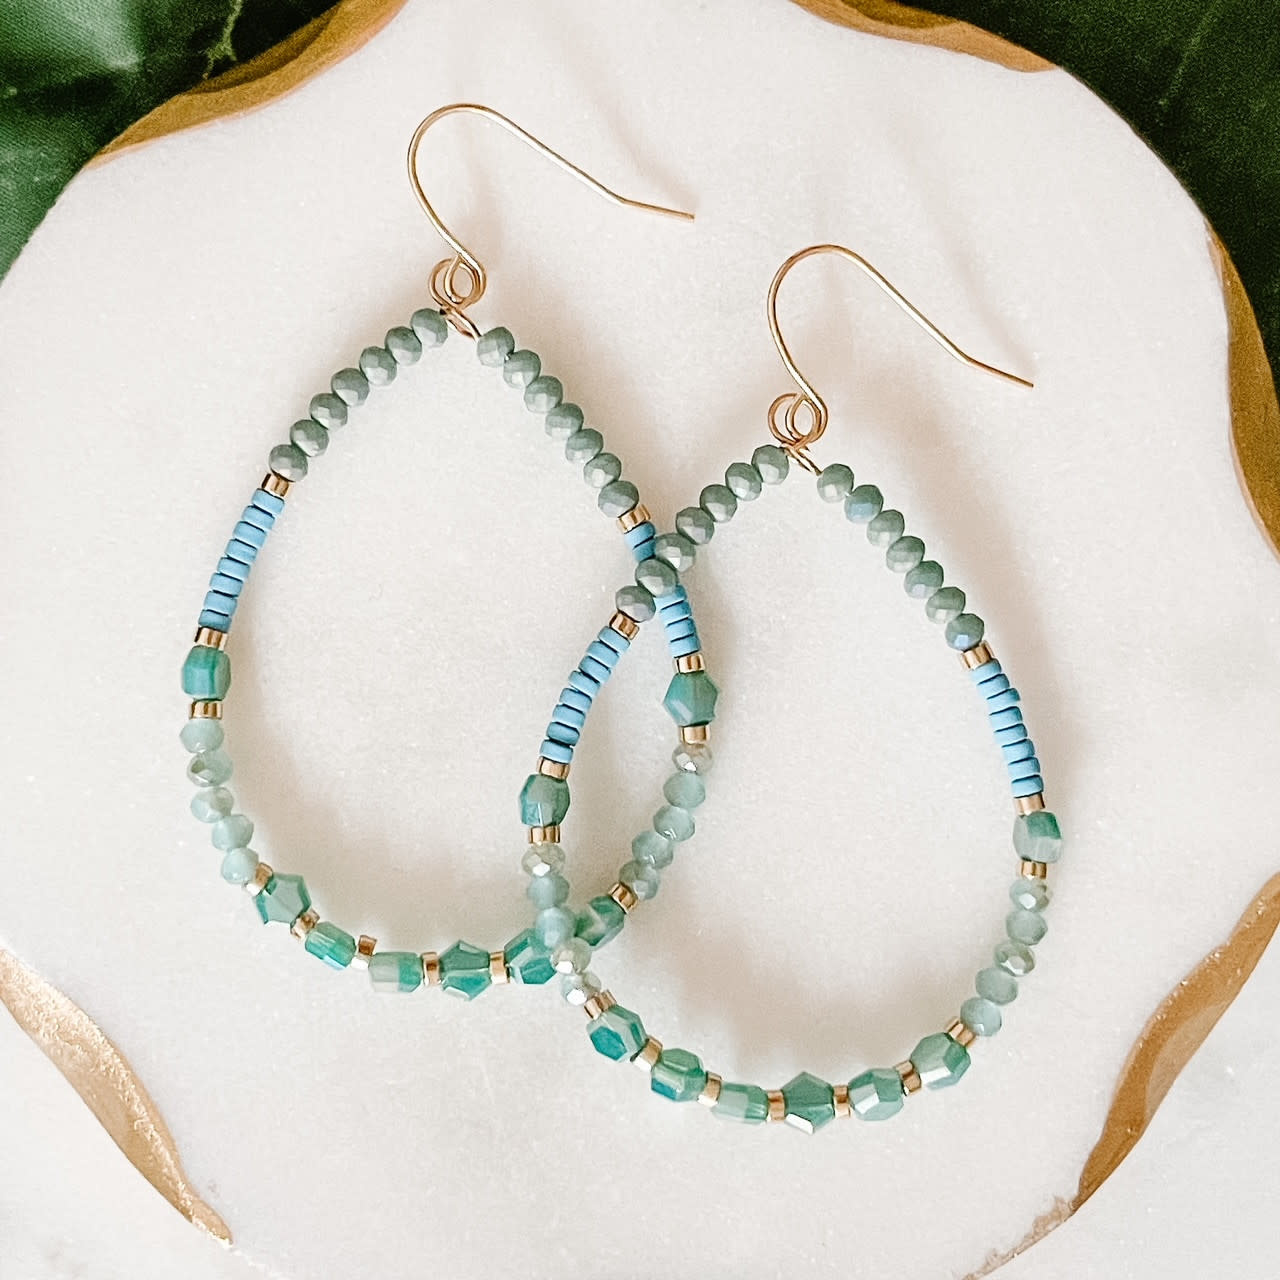 Lou & Co. Mint/Turquoise Silicone-Coated and Glass Bead Teardrop Earrings